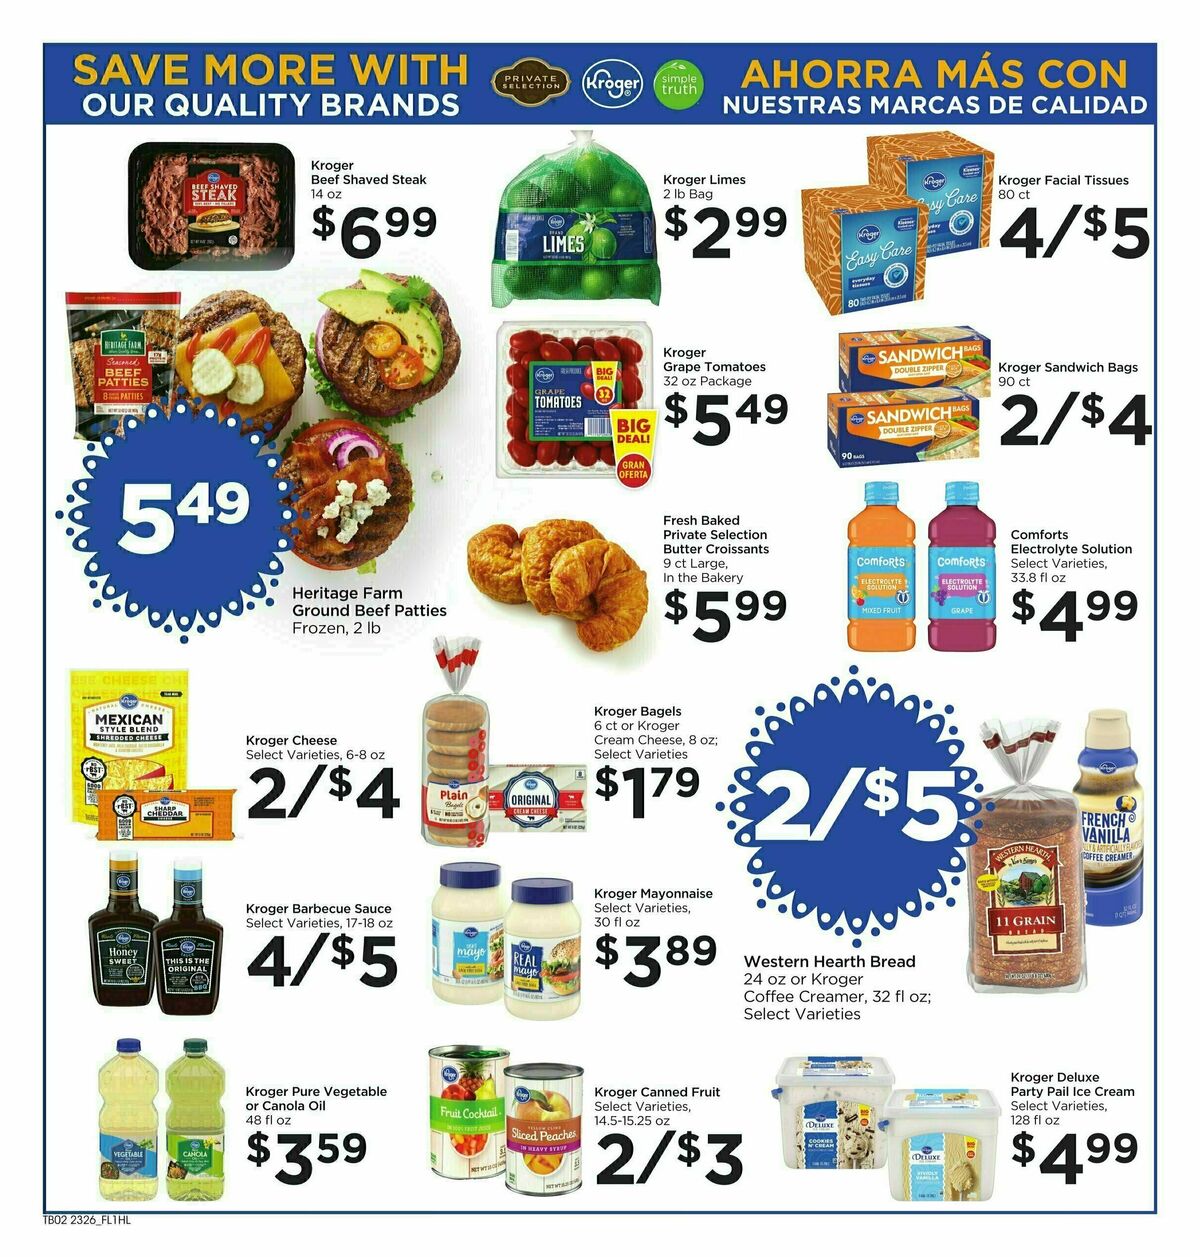 Food 4 Less Weekly Ad from July 26